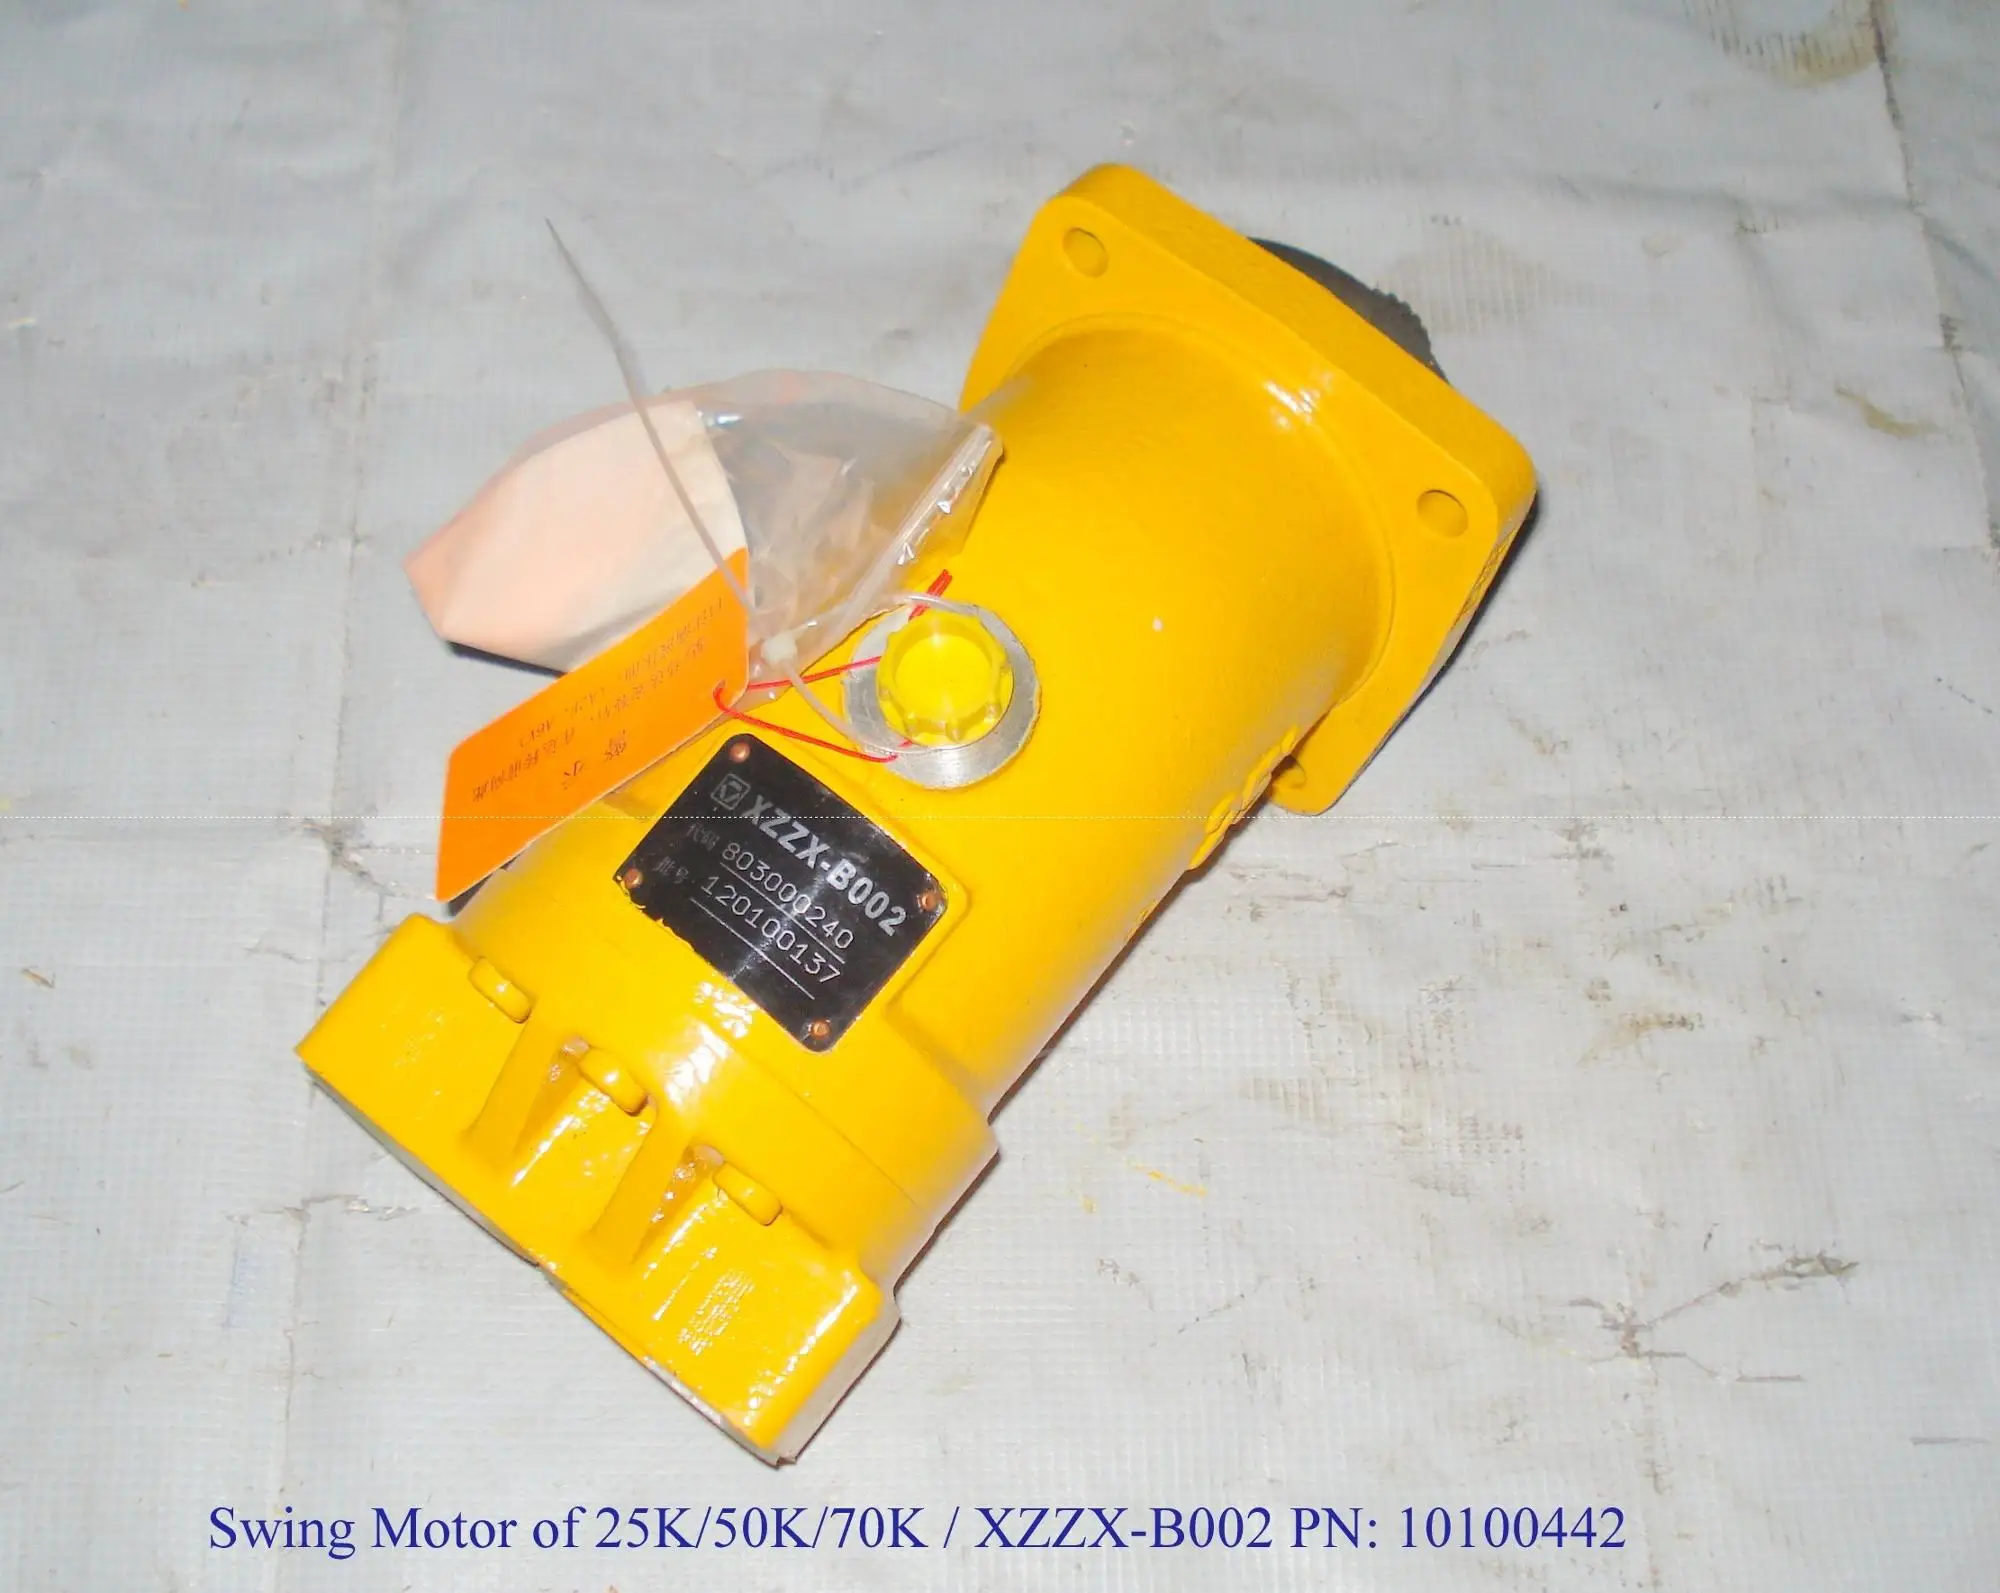 Truck Crane Parts Factory Directly Supply Xzzx-b002 Swing Motor Of 